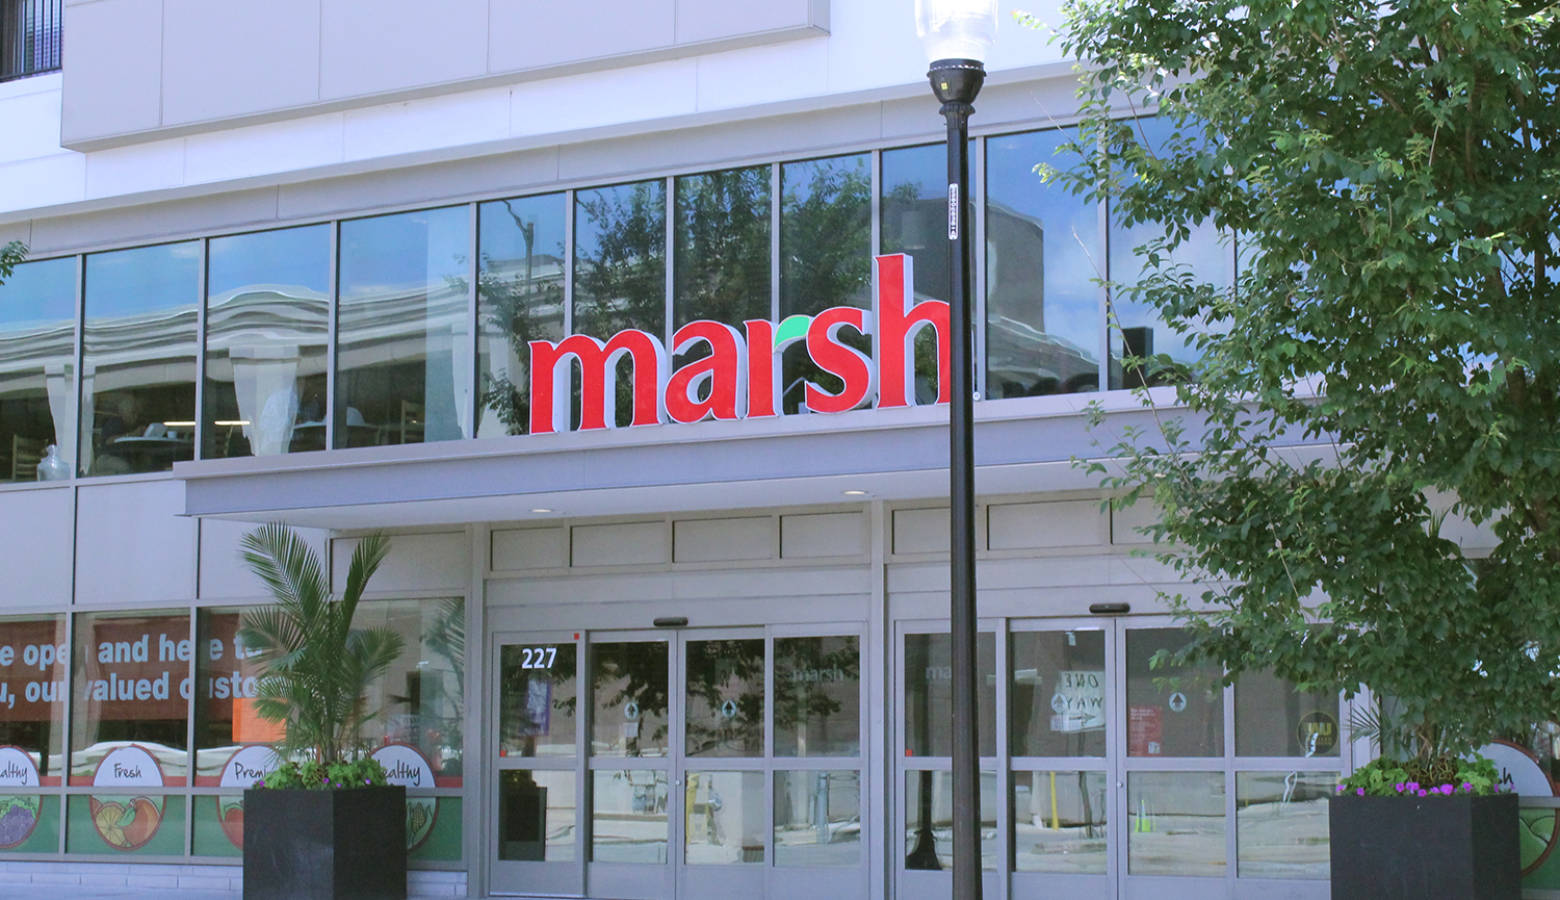 A Kroger subsidiary made an offer on 11 Marsh stores, including this one in Indianapolis, at Monday's bankruptcy auction. (Lauren Chapman/IPB News)